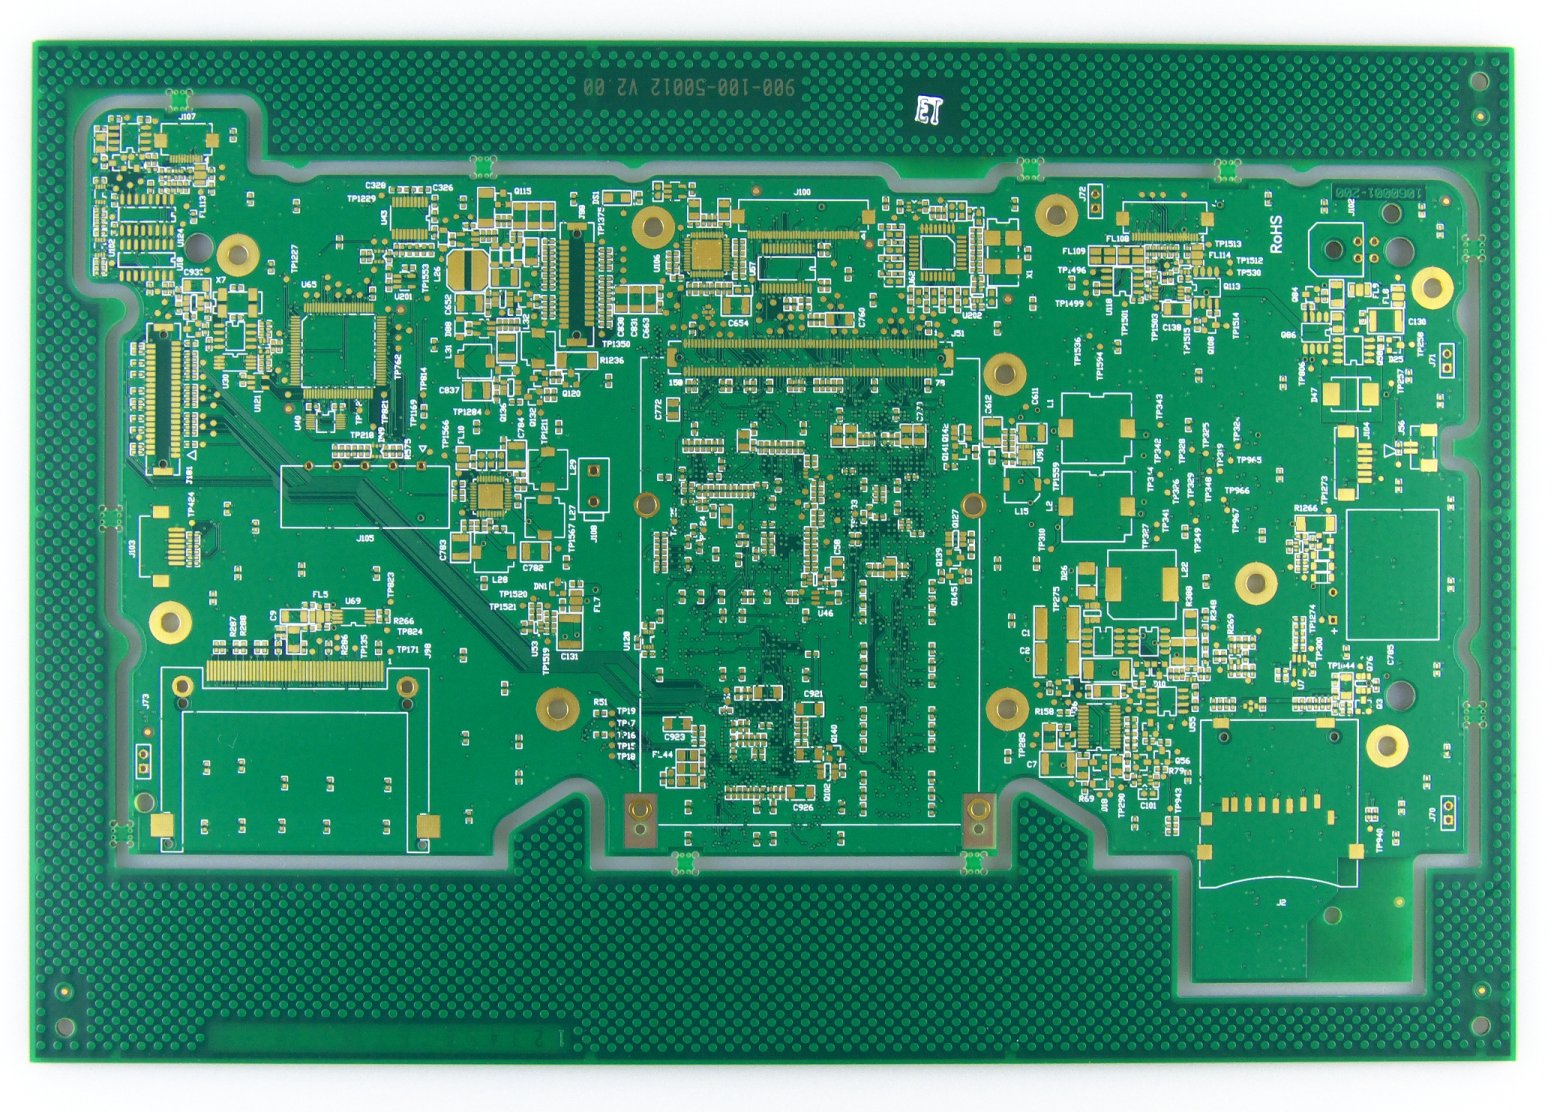 Example of an immersion gold PCB surface finish. Image from http://www.standardpcb.com/.